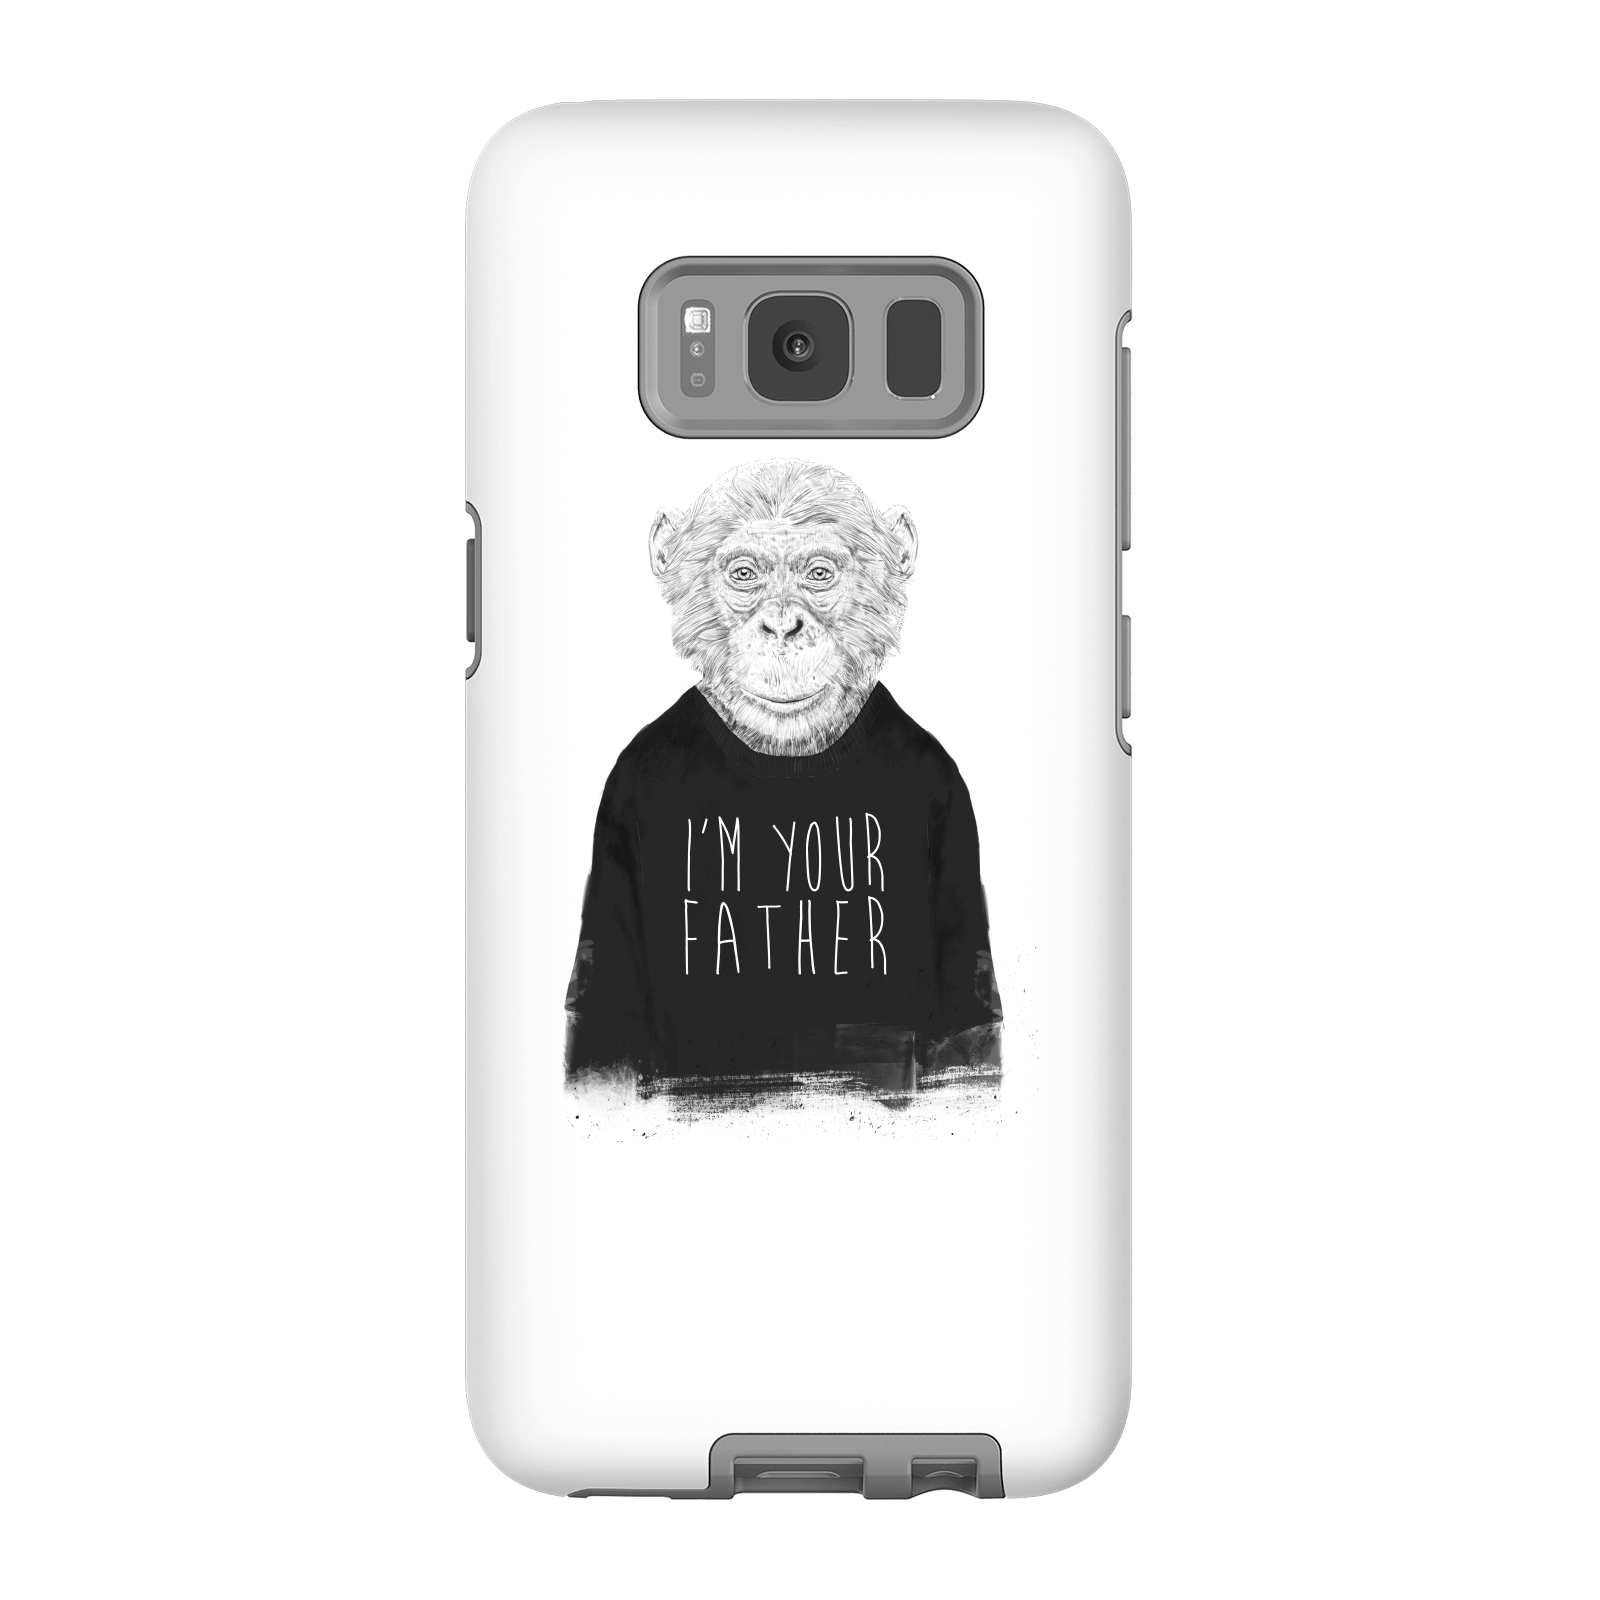 Balazs Solti I'm Your Father Phone Case for iPhone and Android - Samsung S8 - Tough Case - Gloss